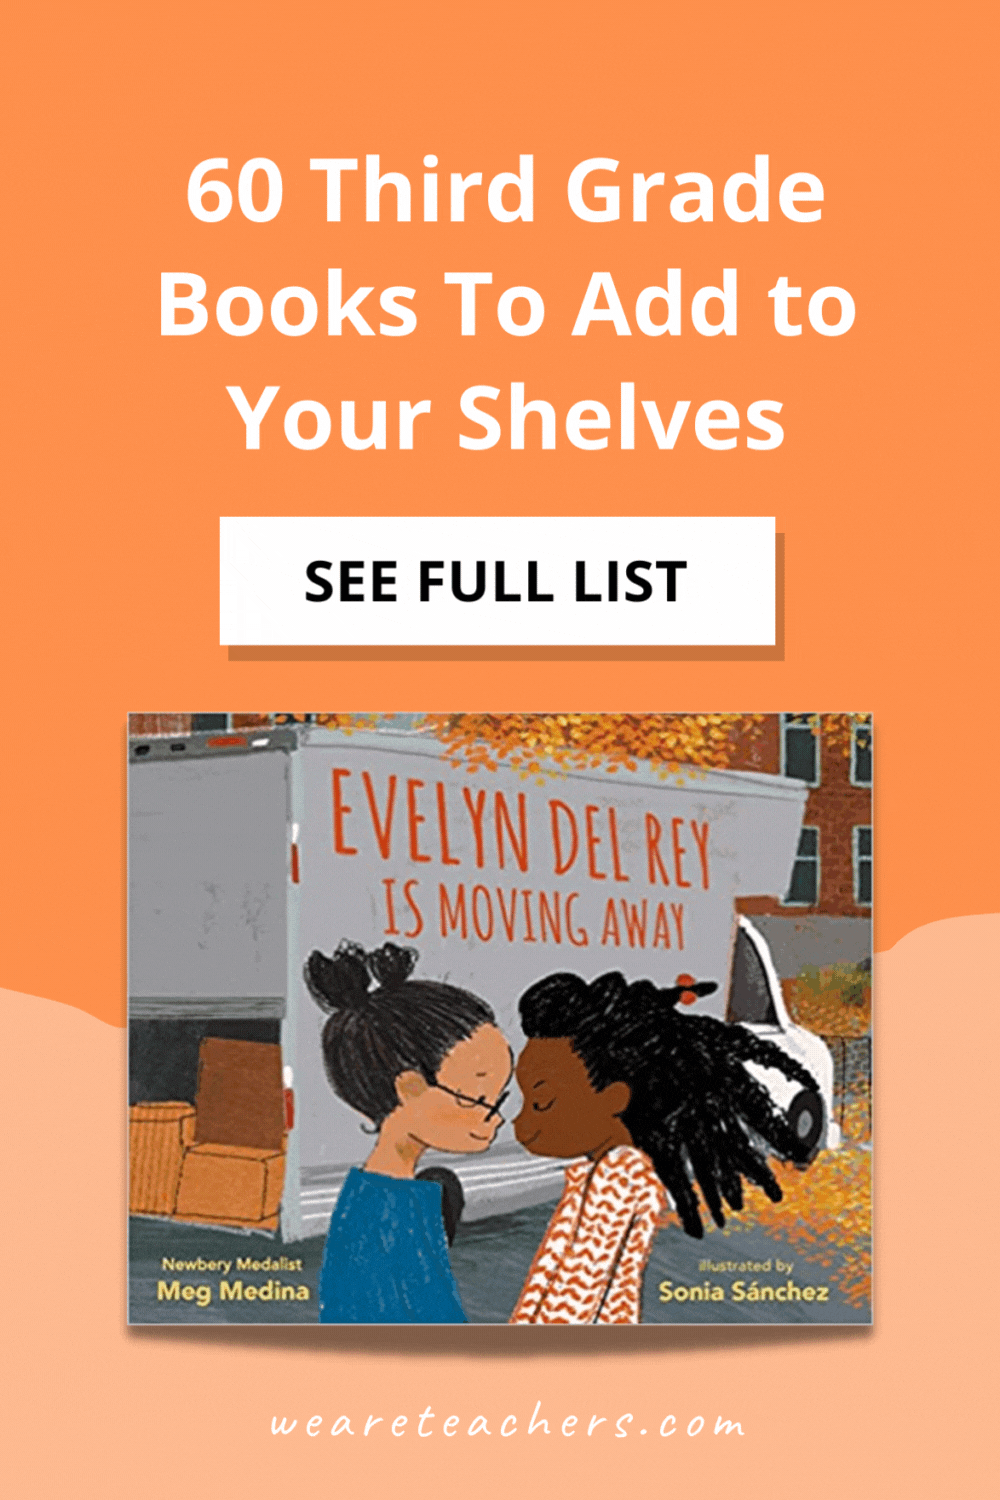 Looking for new 3rd grade books to share with students? This list of recent titles has so many awesome choices!